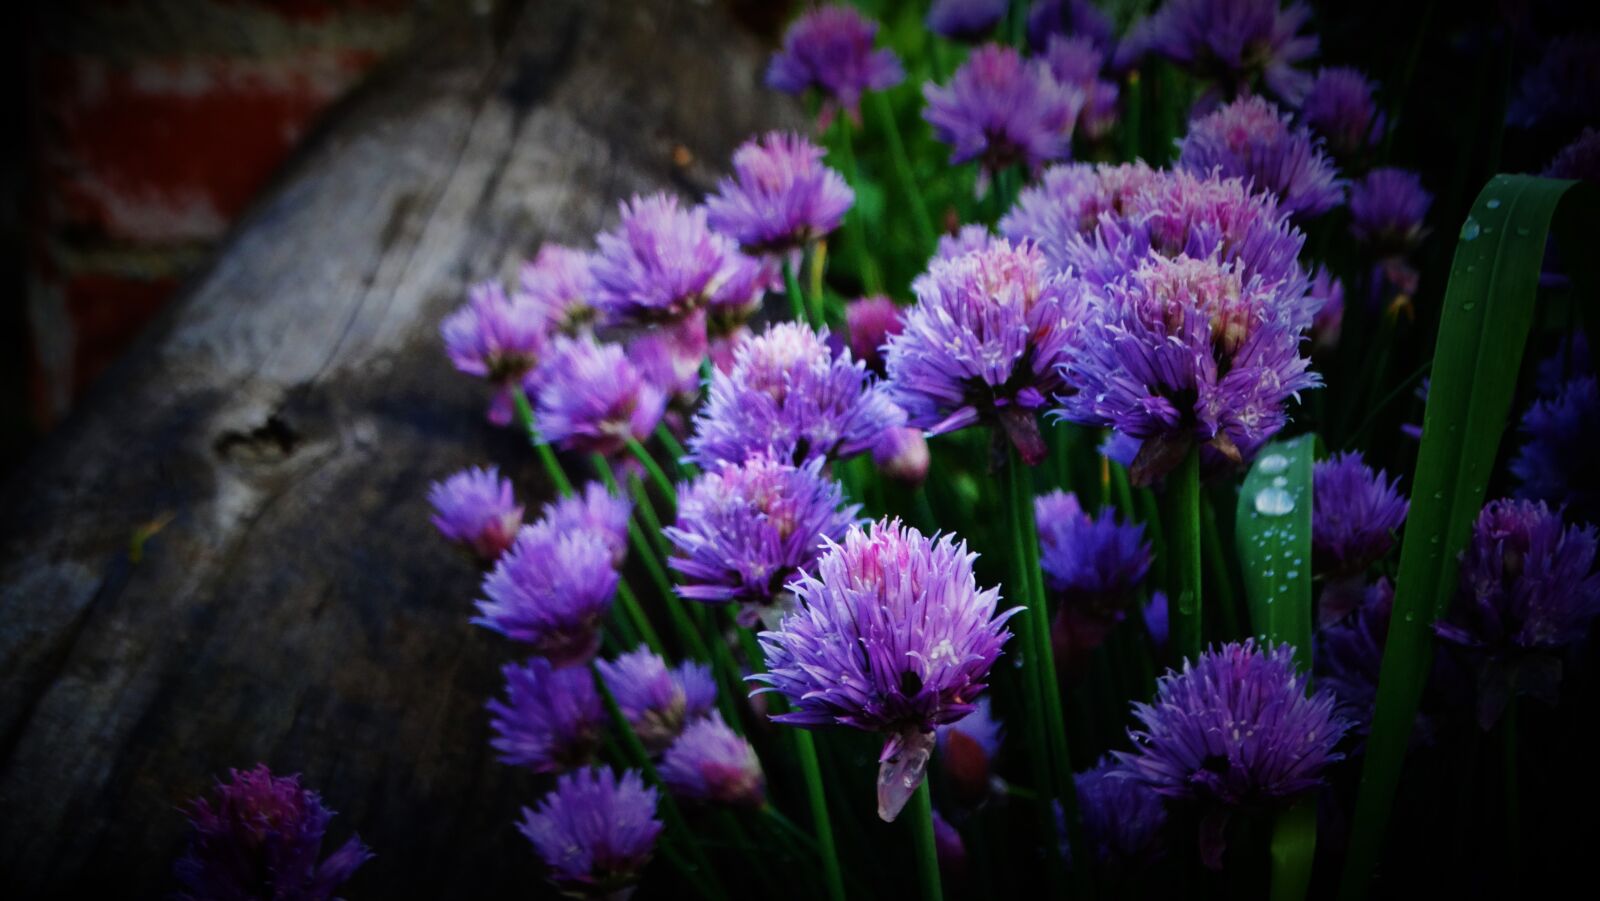 Sony Cyber-shot DSC-HX300 sample photo. Plant, chives, flowers photography